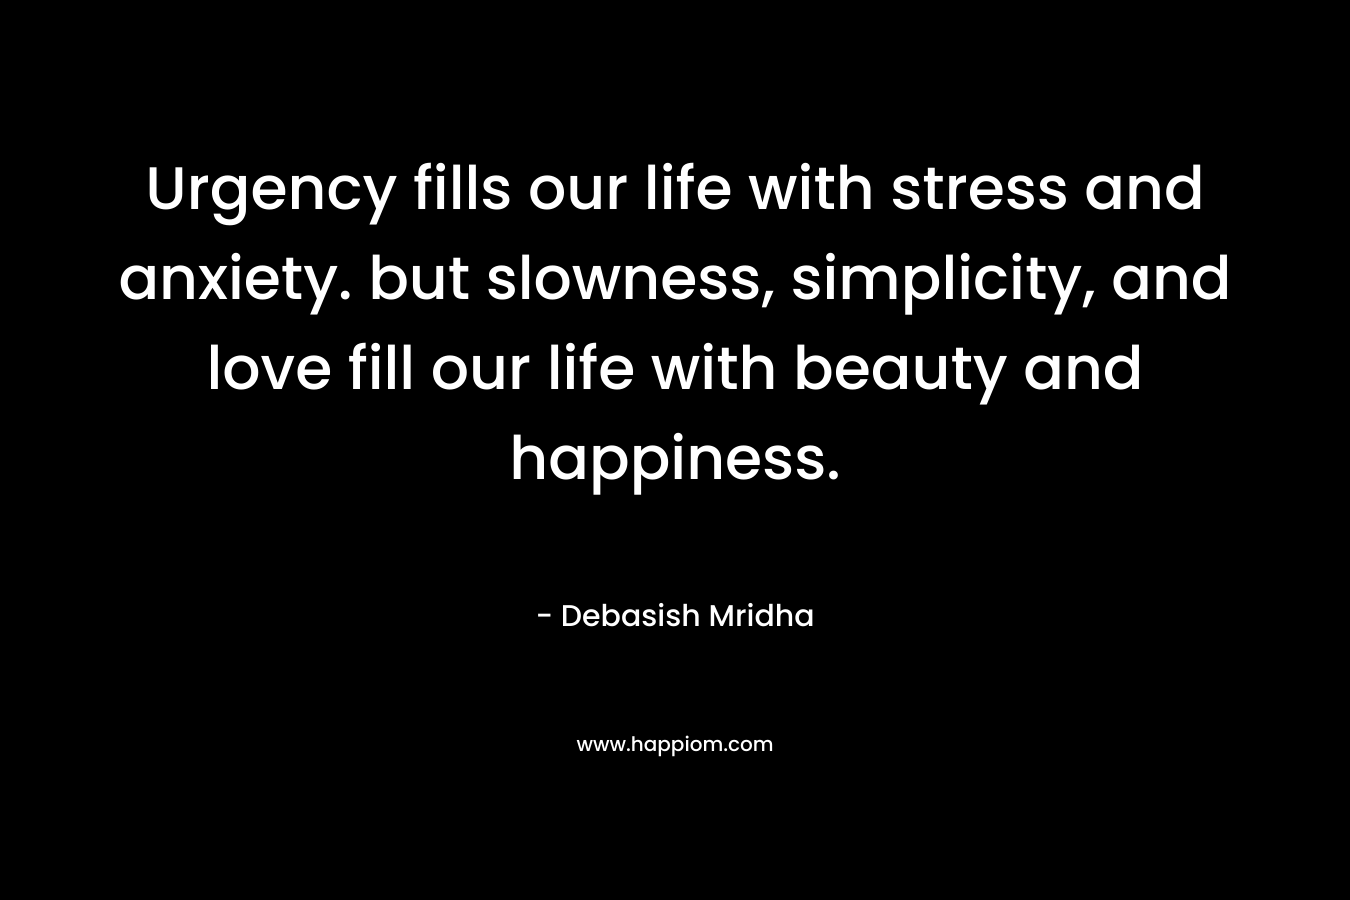 Urgency fills our life with stress and anxiety. but slowness, simplicity, and love fill our life with beauty and happiness.